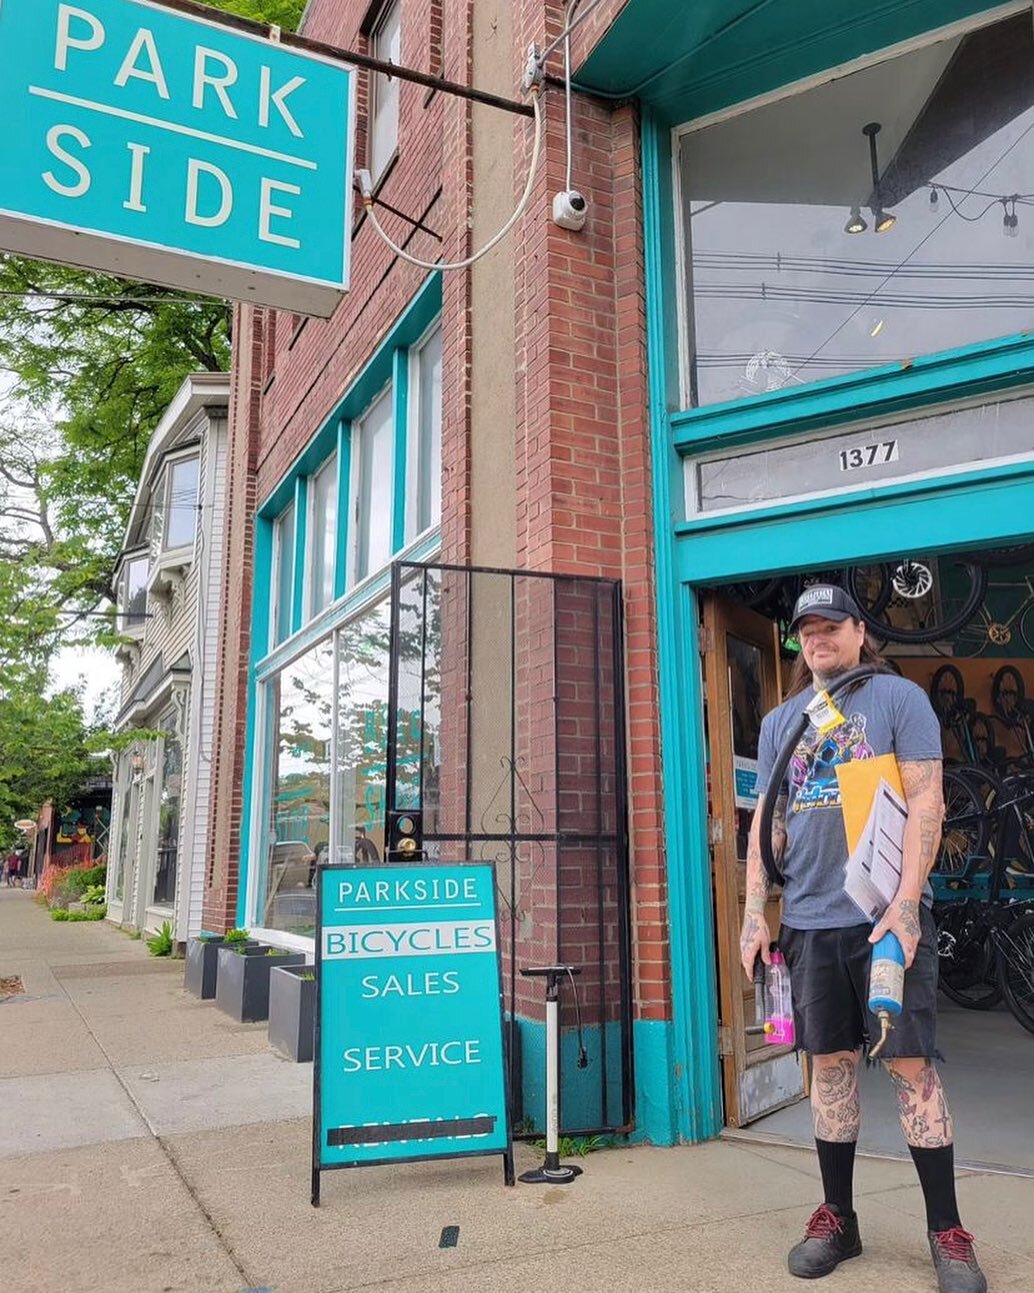 Congratulations @flaherty4130 !! Jimmy is the new owner of @parksidebikes ‼️ He jumped in to be a part of this project on Day 1. He believes in our community and provides the service, bikes, and parts to back it up. Excited for your new journey Jimmy